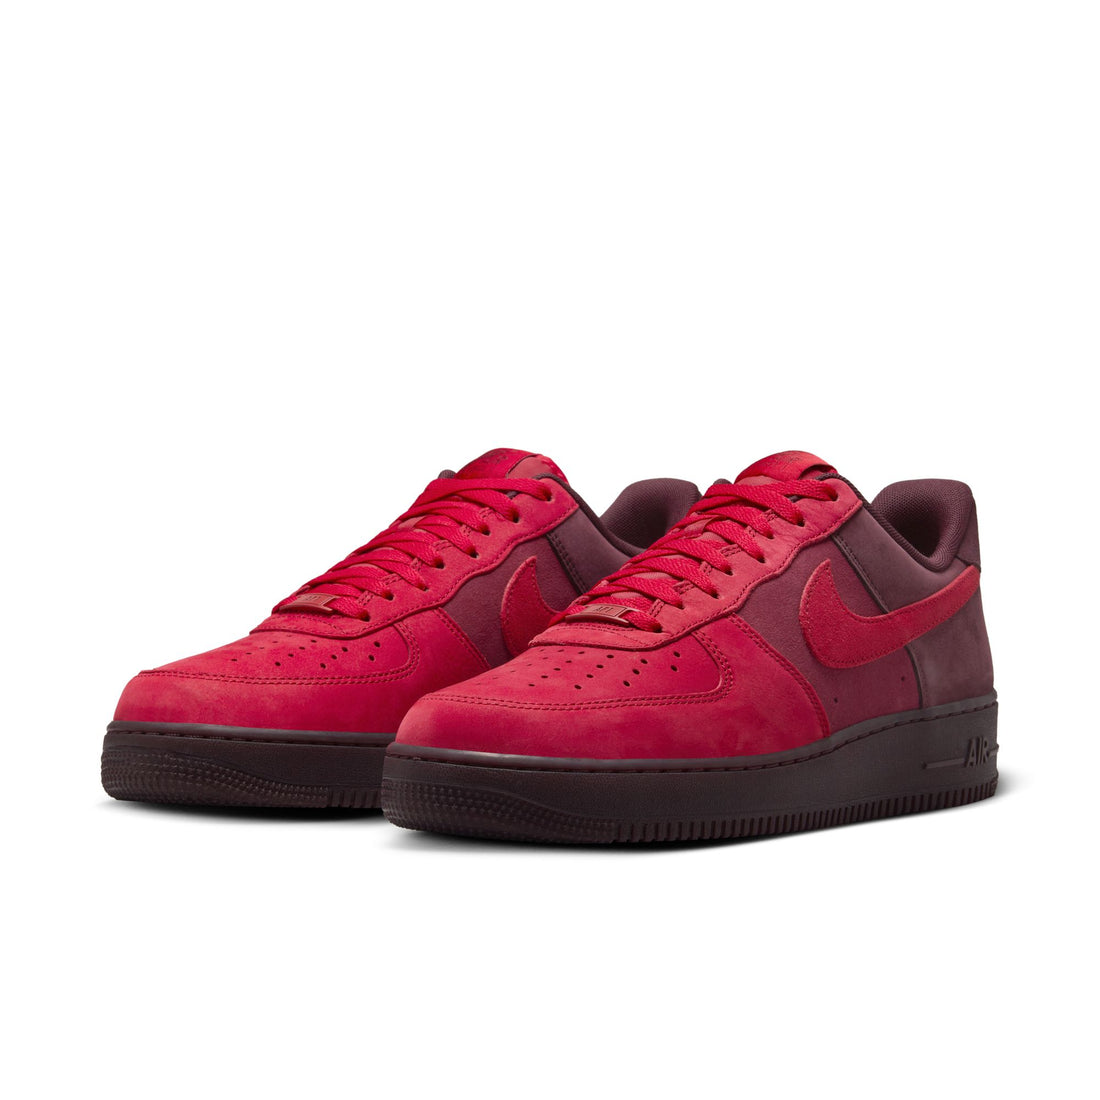 AIR FORCE 1 LOW LAYERS OF LOVE